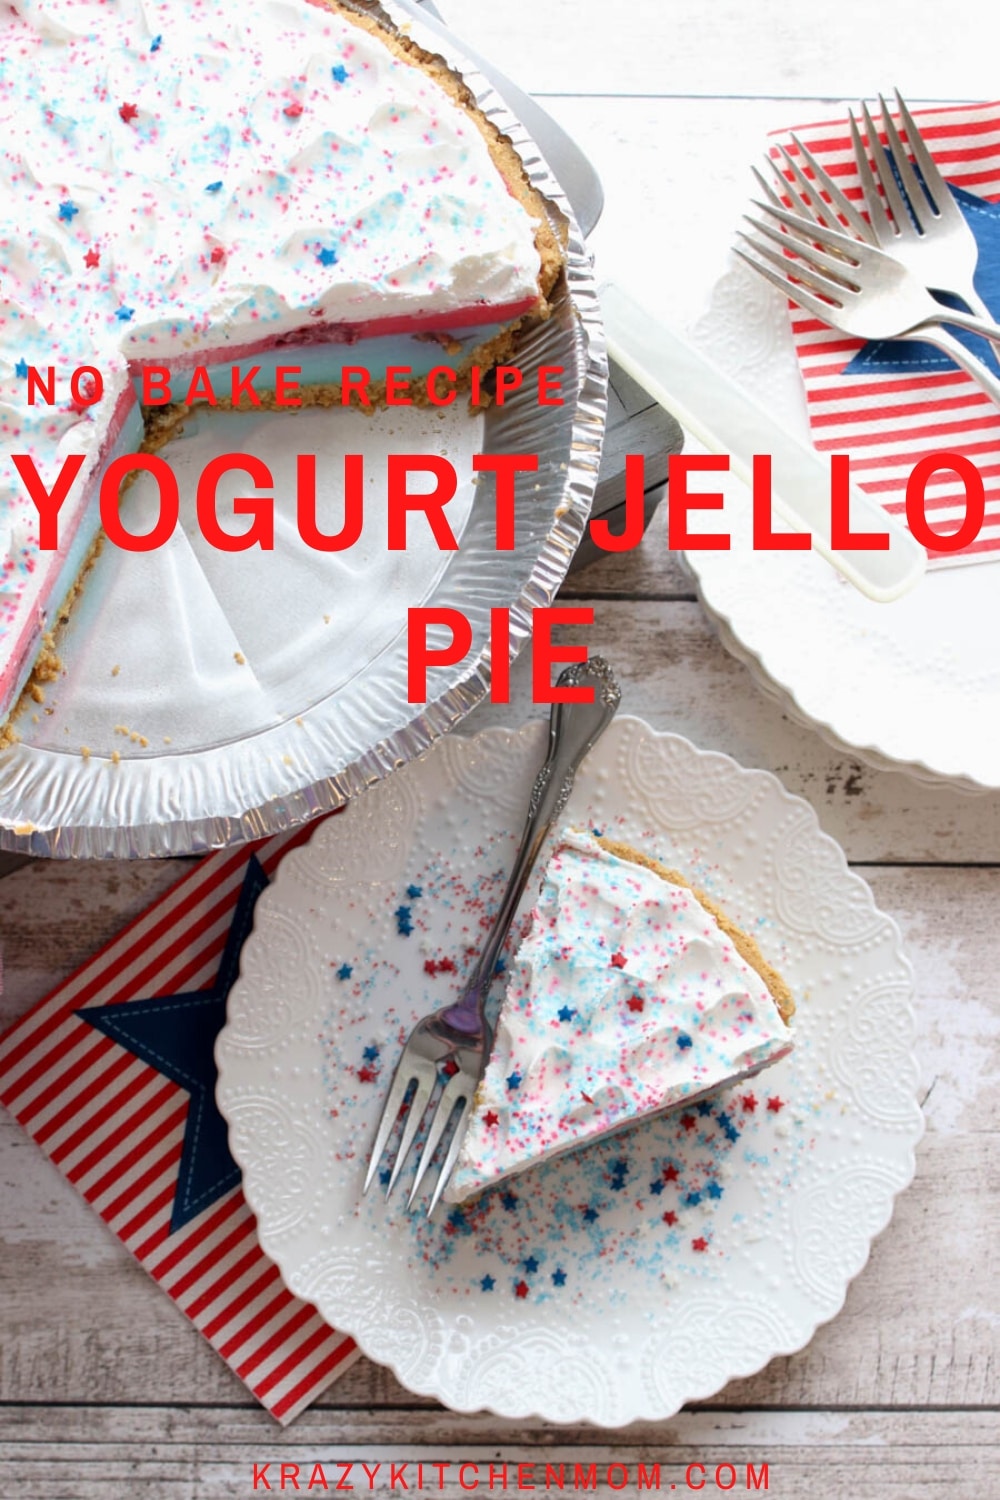 Creamy and cool Red White Blue Yogurt Jello Pie is an easy no-bake recipe that is perfect for July 4th or any summer day.  via @krazykitchenmom